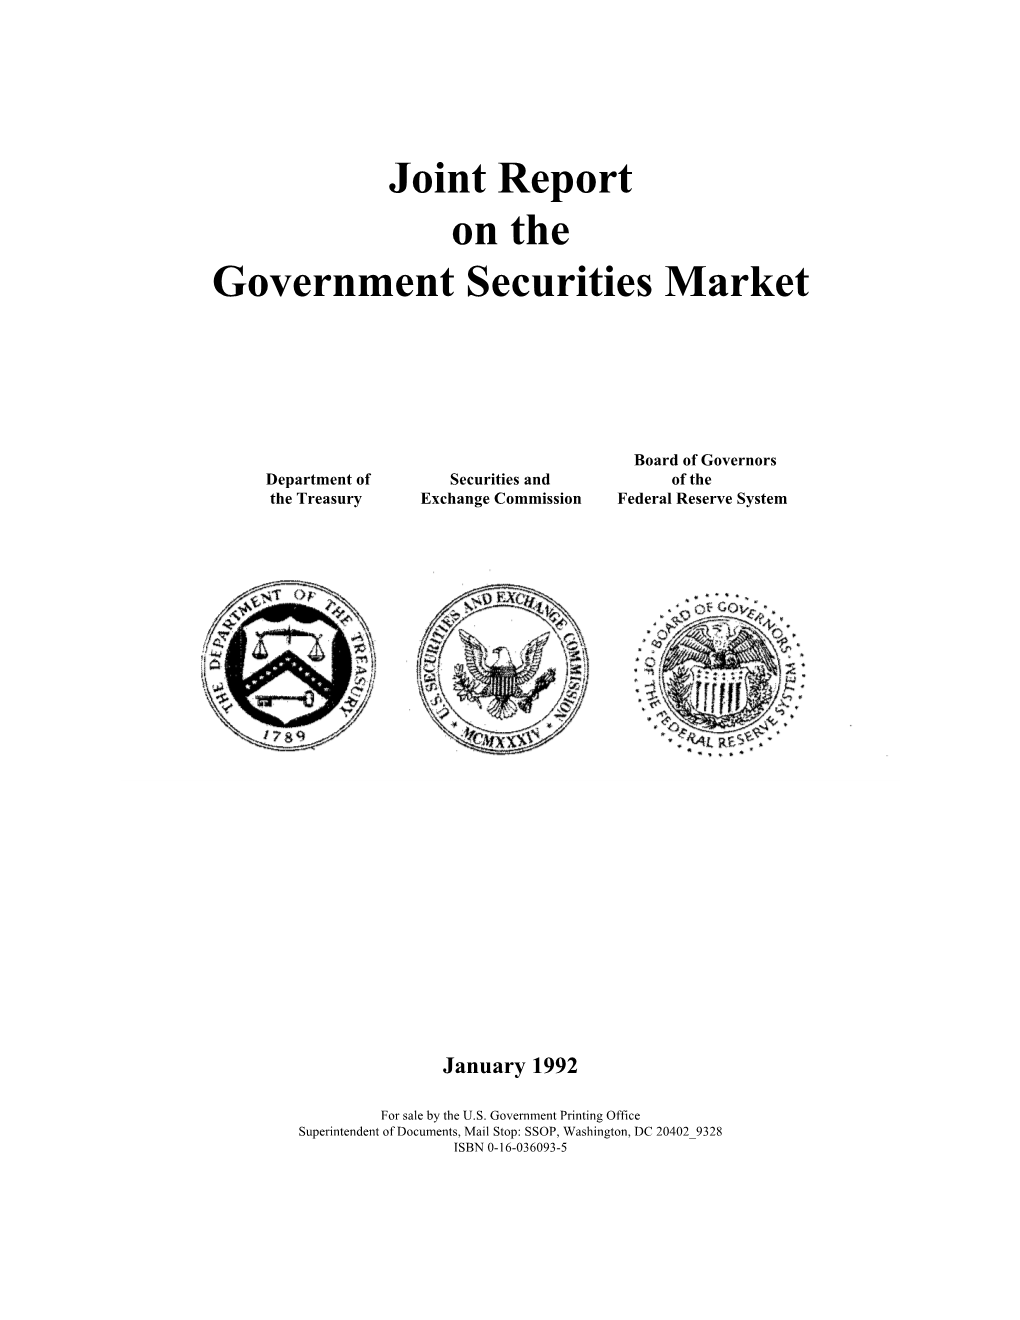 1992 Joint Report on the Government Securities Market